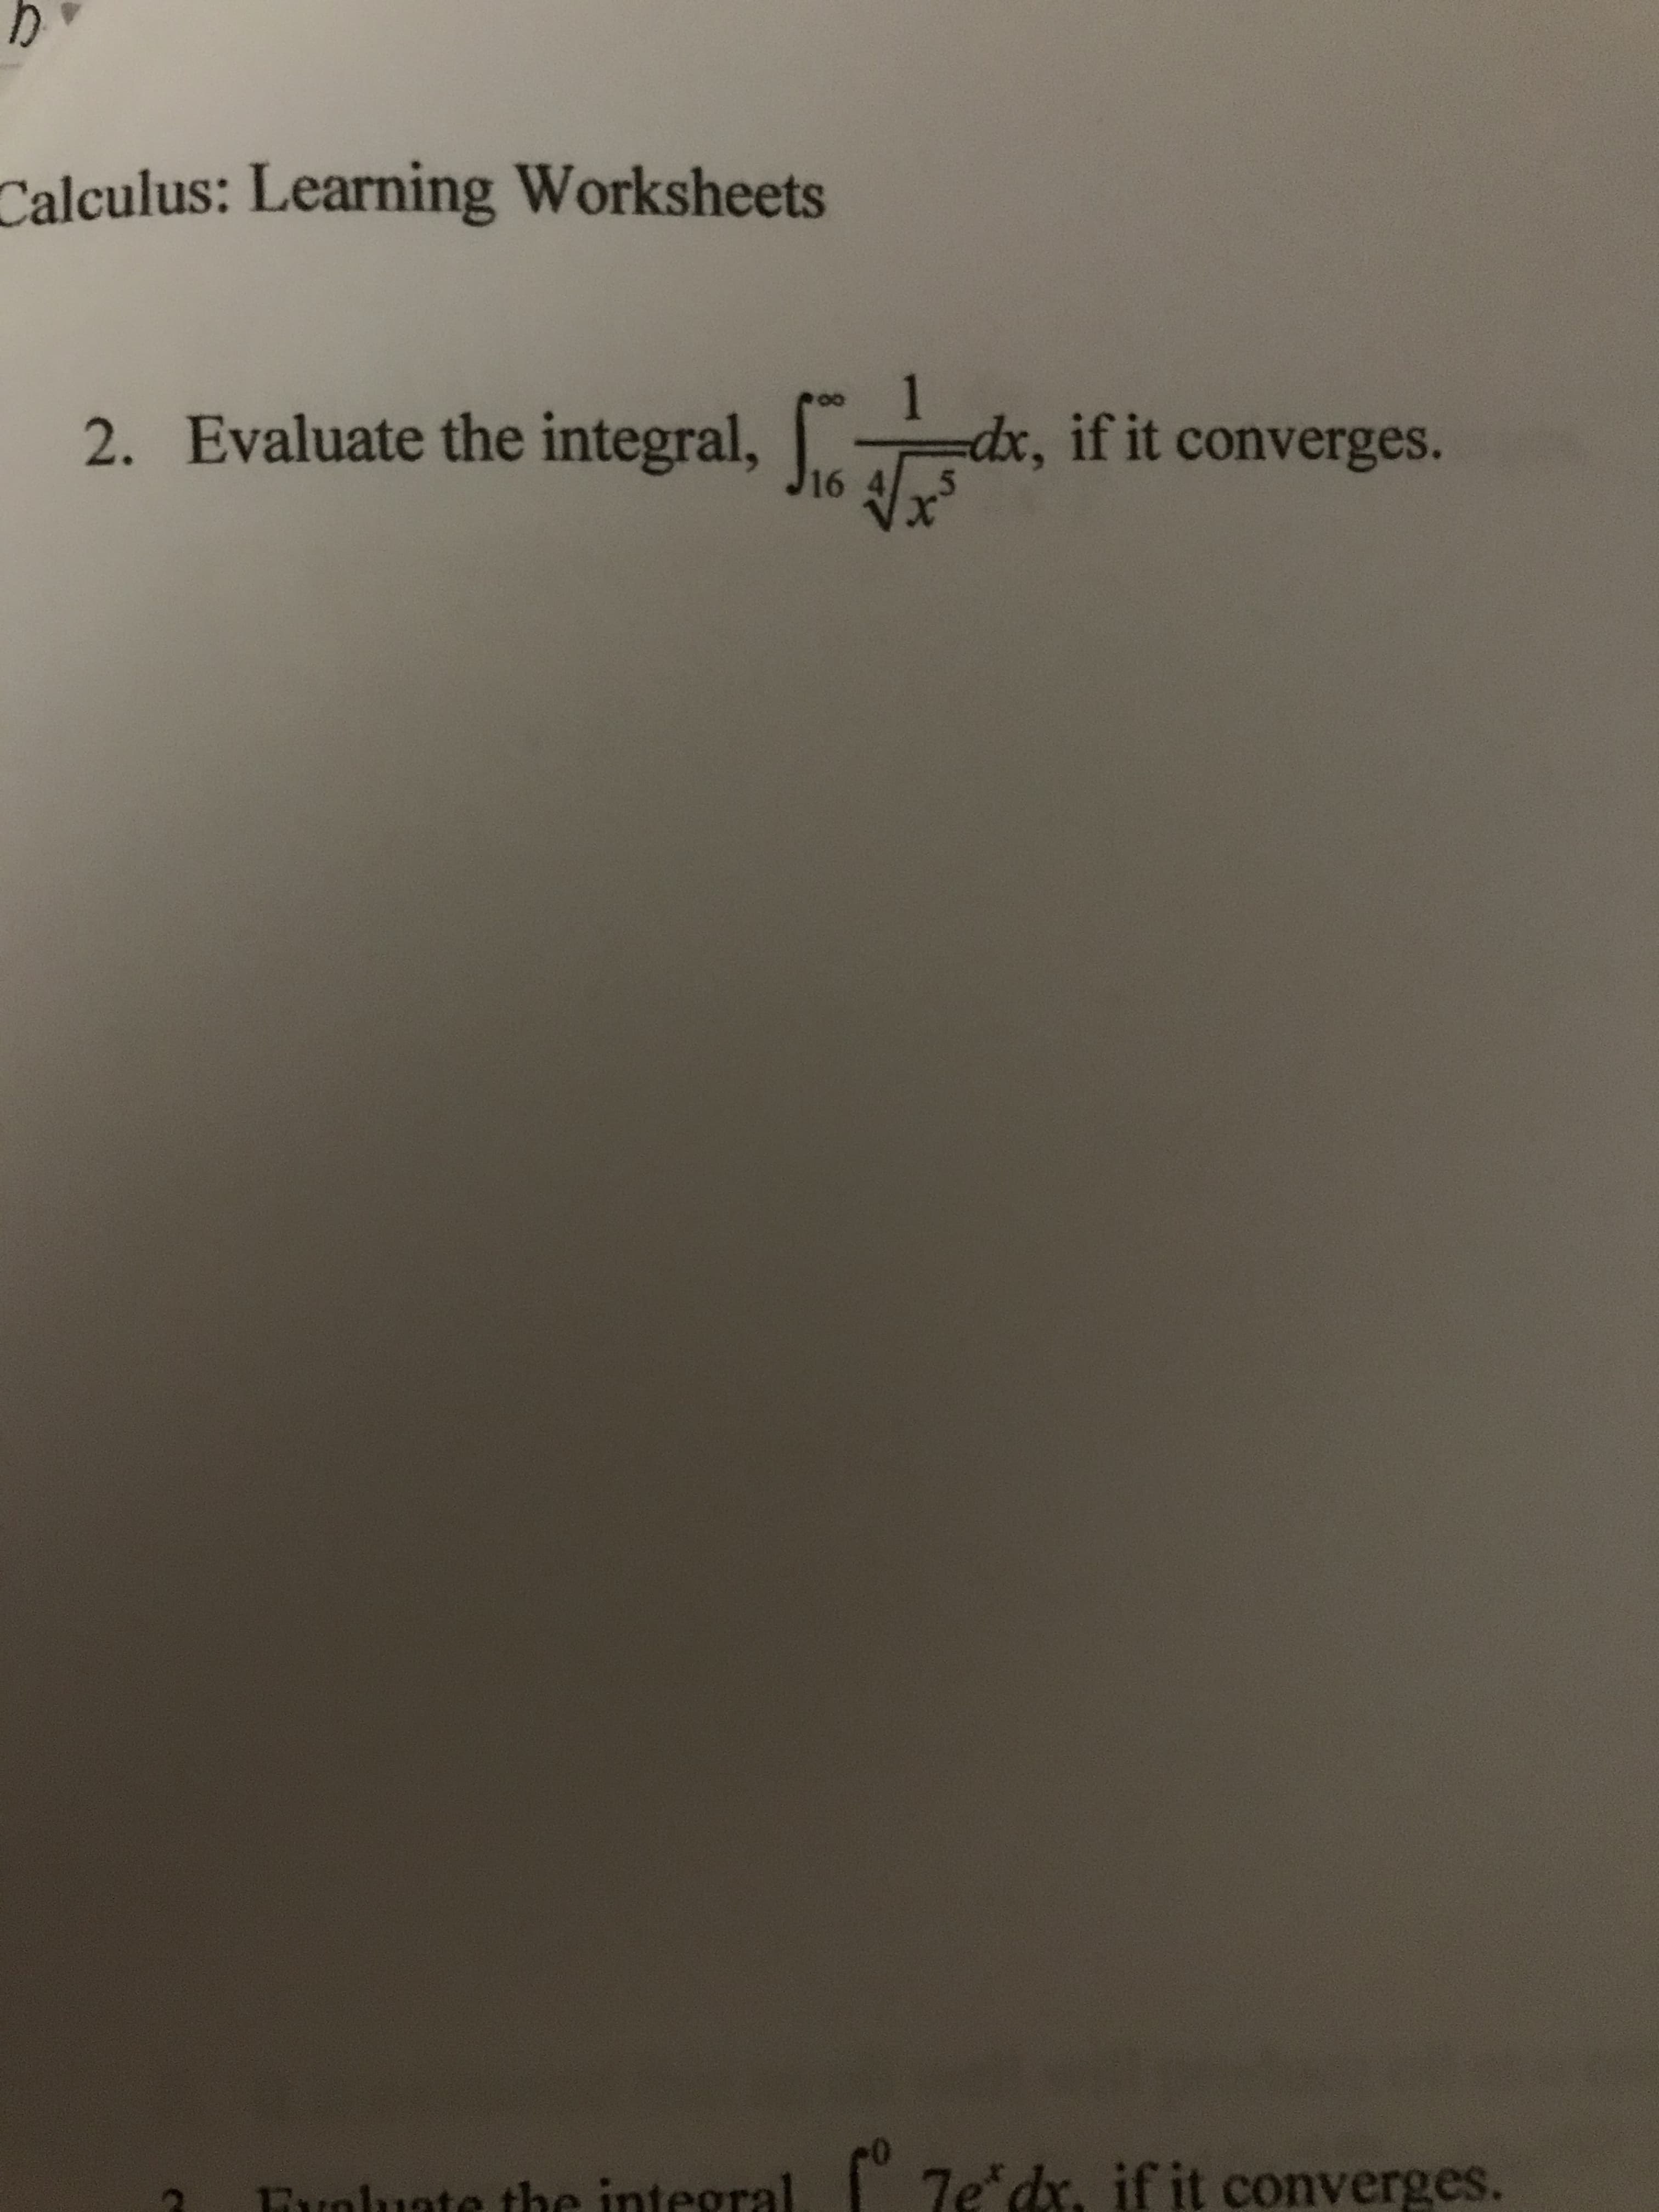 Calculus: Learning Worksheets
1.
2. Evaluate the integral, dx, if it converges.
Fvoluate the integral.
7e dx, if it converges.
